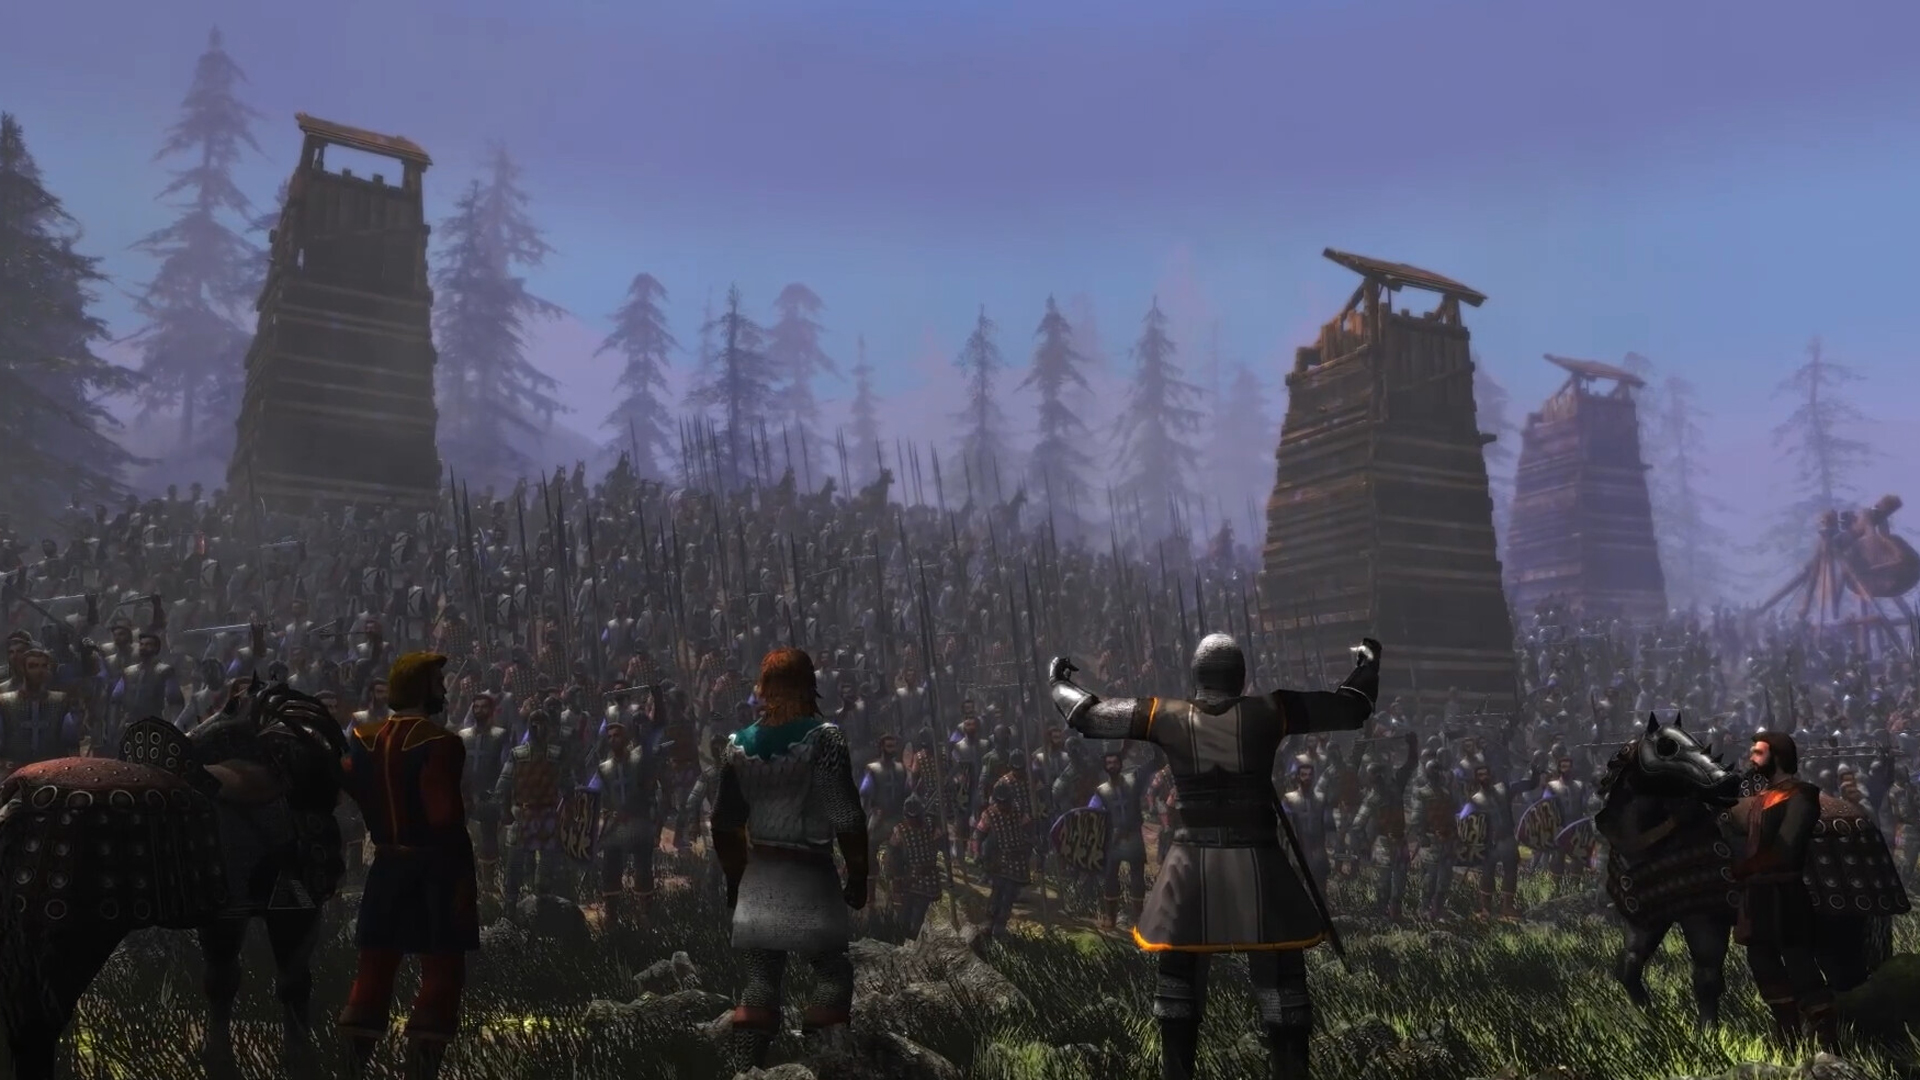  Renaissance Kingdom Wars is a pleasingly simple hybrid of Crusader Kings, Total War, and Age of Empires 